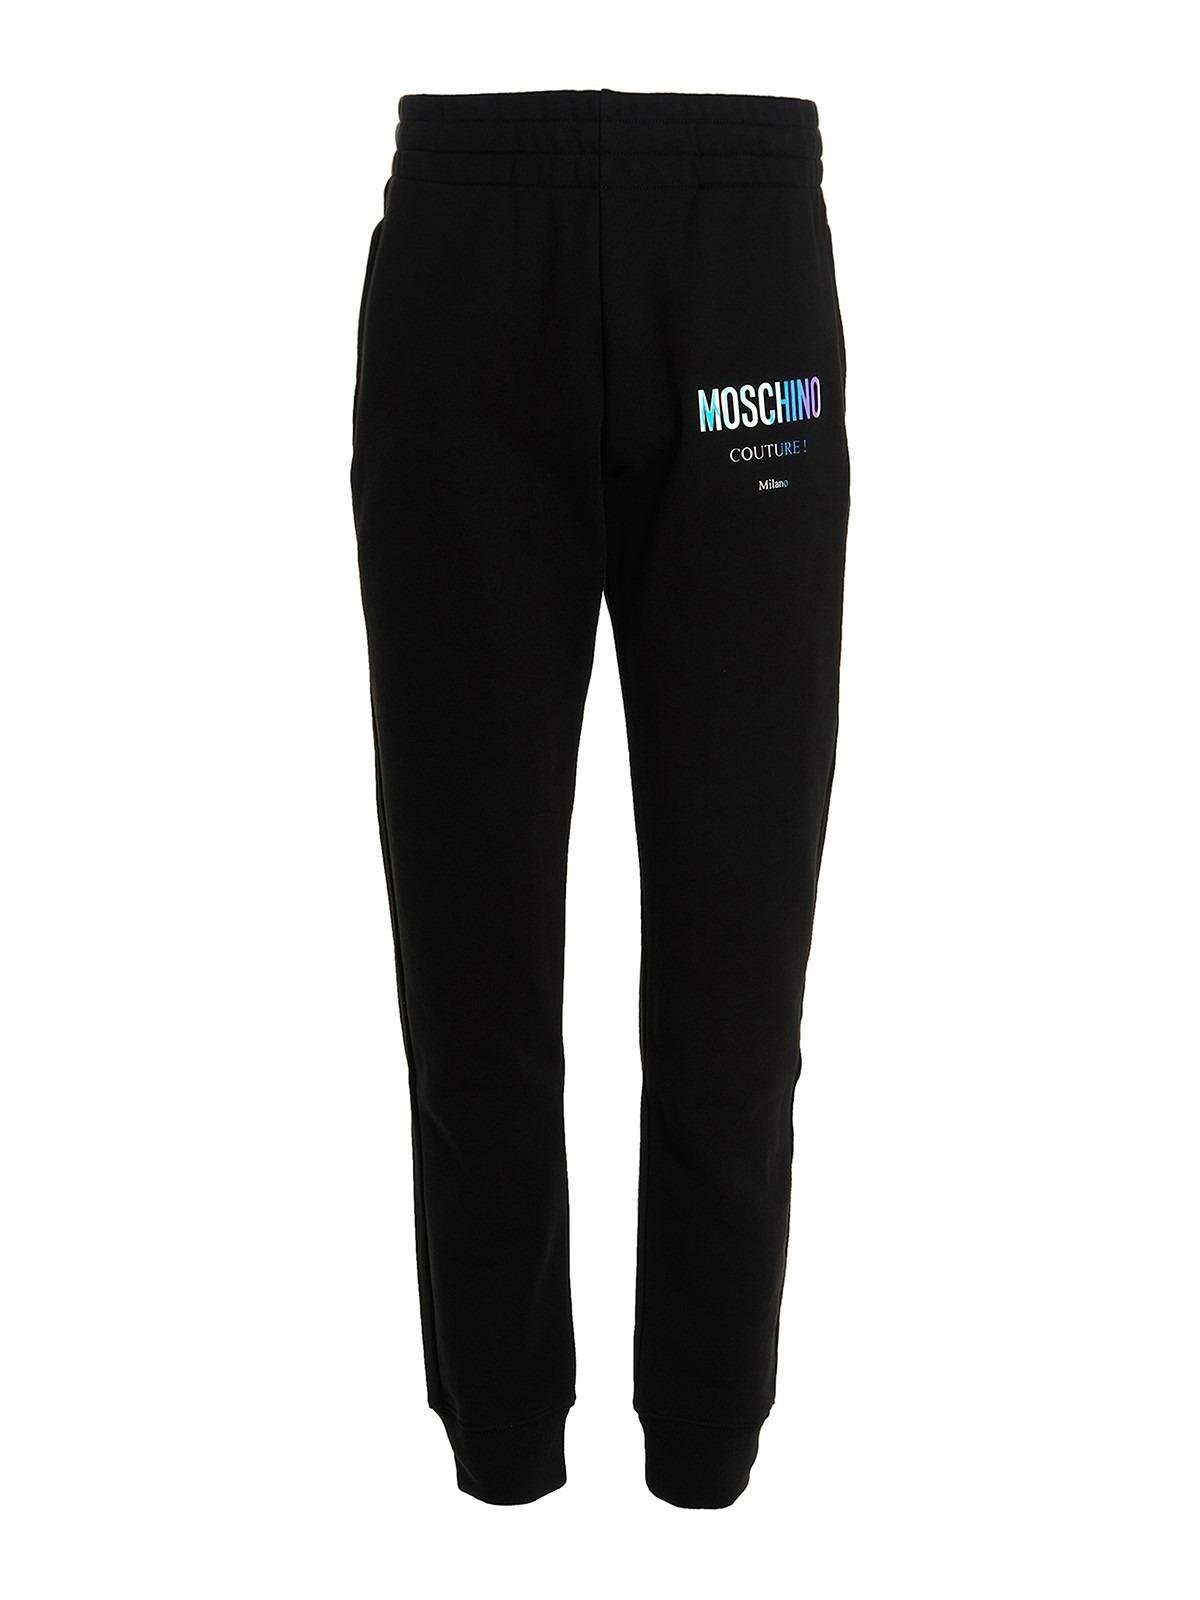 Moschino Mens Fantasy Print Black Holographic Logo Tracksuit Bottoms by MOSCHINO